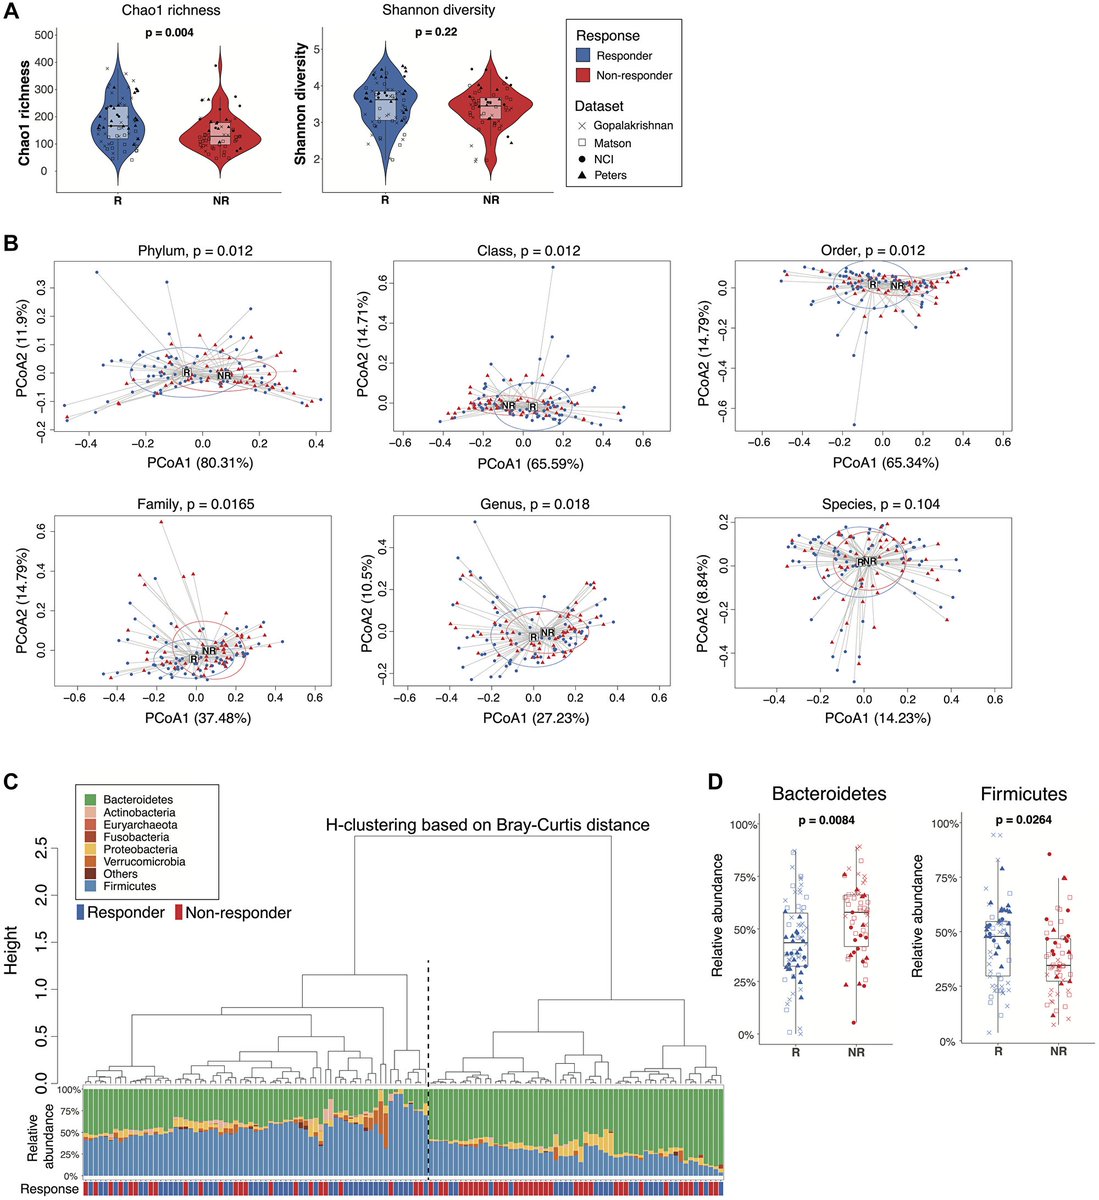 ⚡️ Predicting cancer #immunotherapy response from gut microbiomes using machine learning models @Oncotarget @gulleyj1 @apolo_andrea . oncotarget.com/article/28252/…